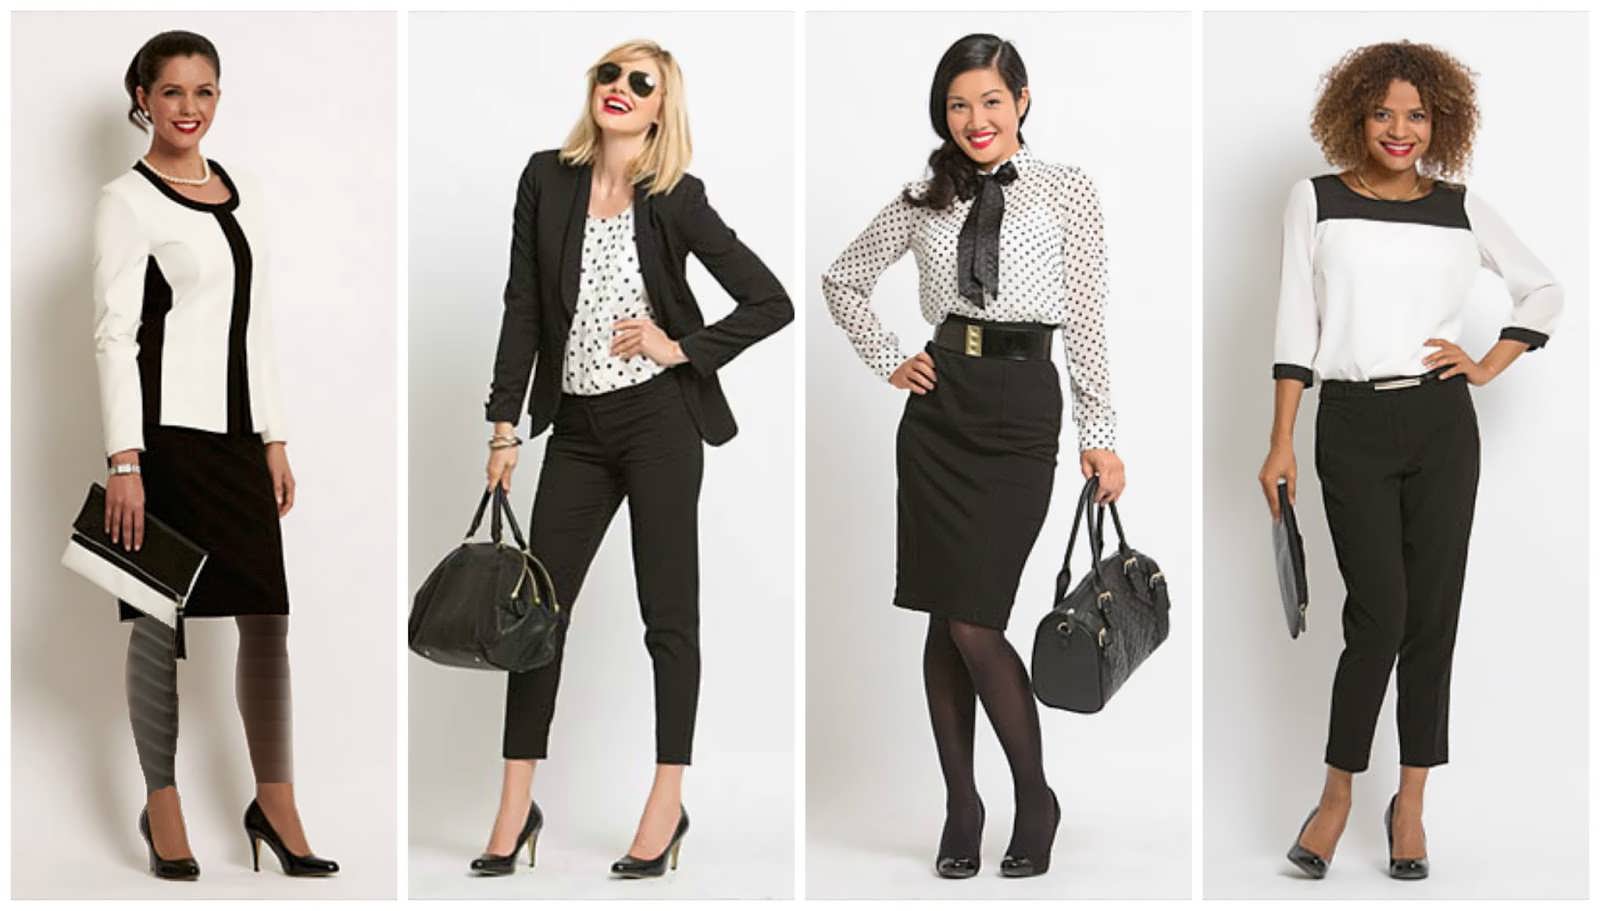 Interview Women Outfits 1 